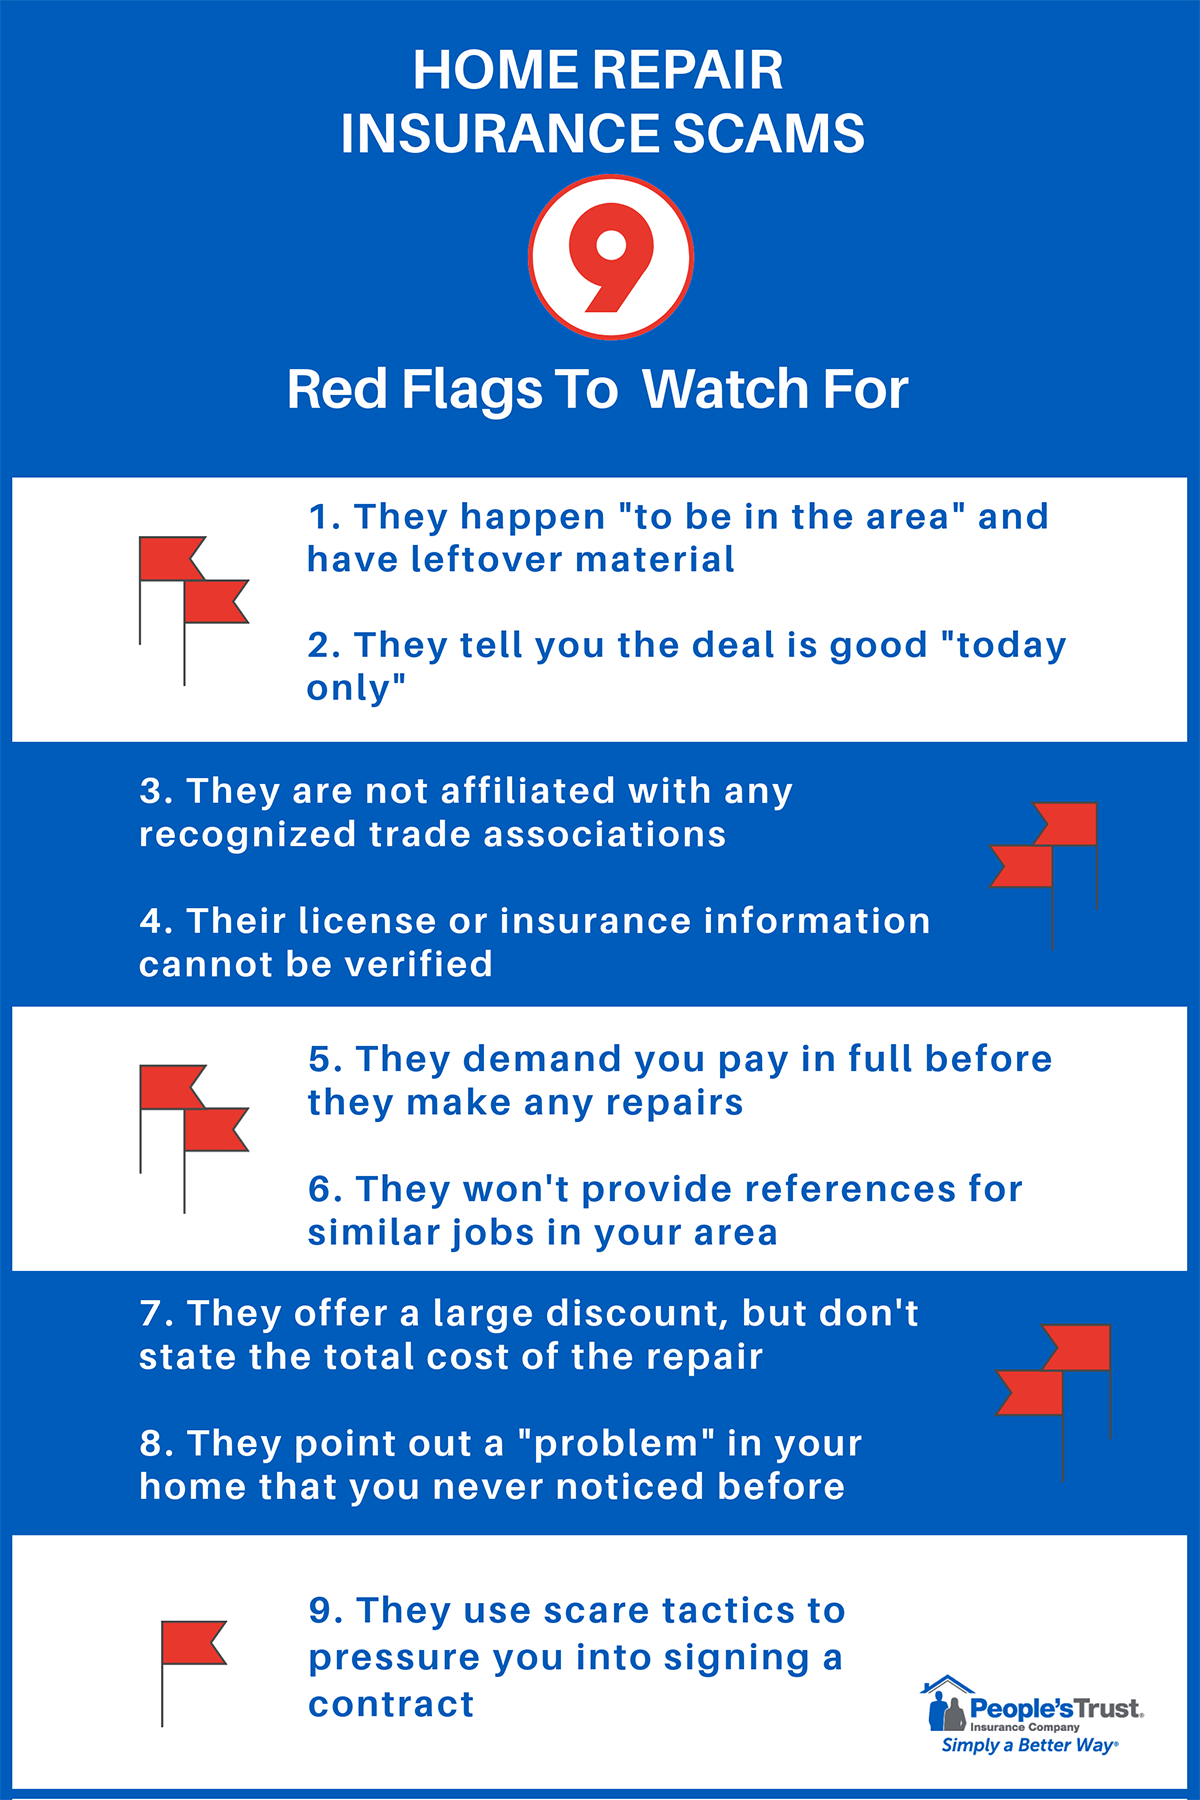 9 Home Repair Insurance Scam Red Flags Infographic